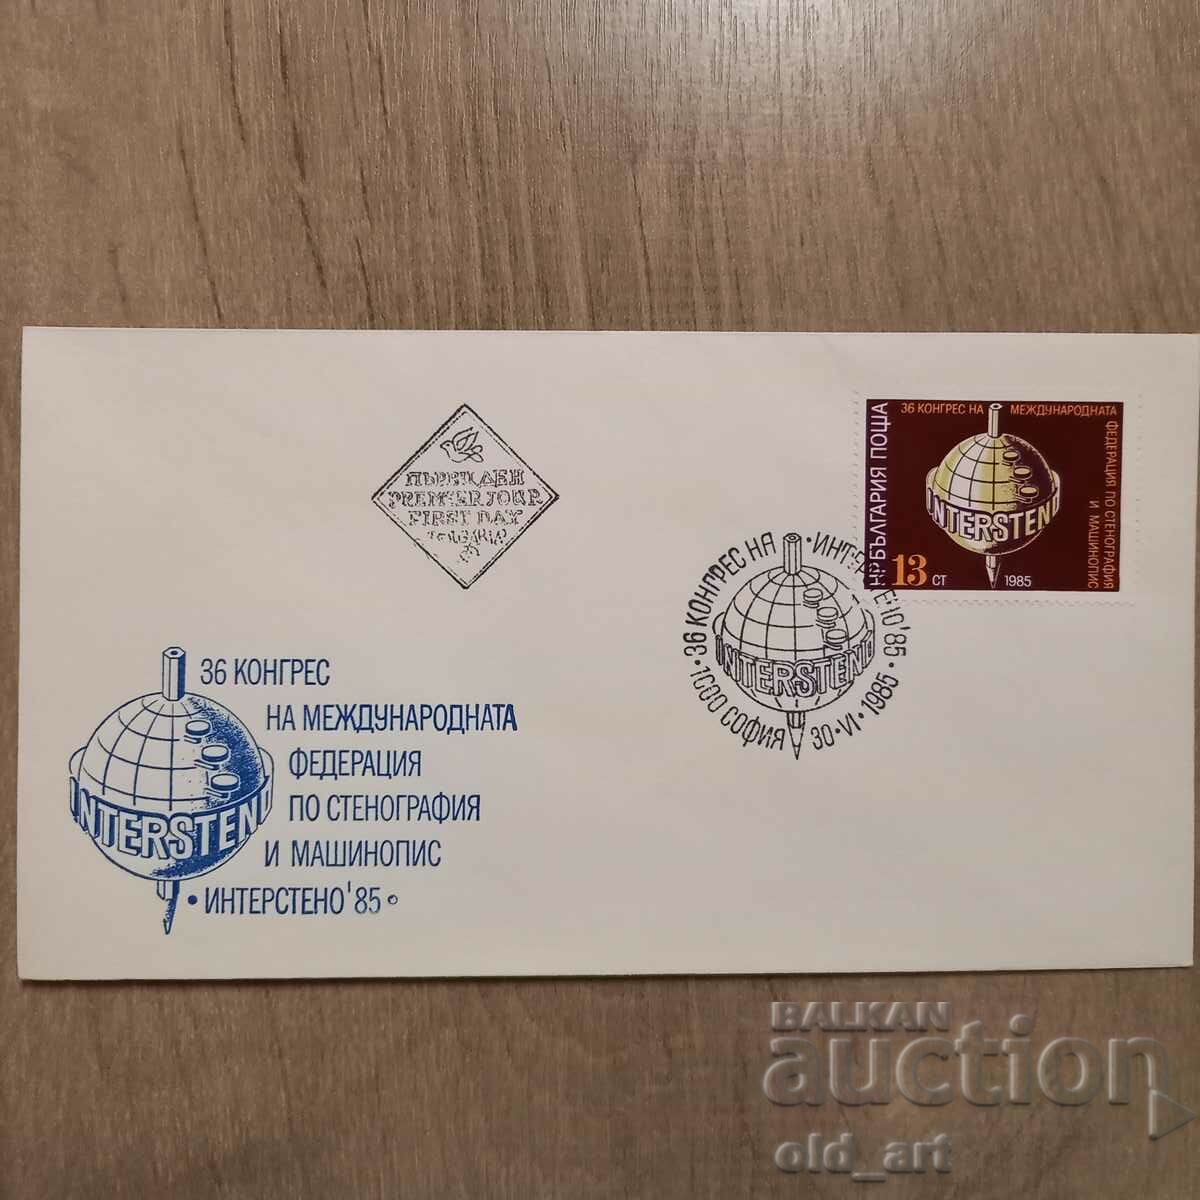 Mailing envelope - 36th Congress of the International Federation of Shorthand